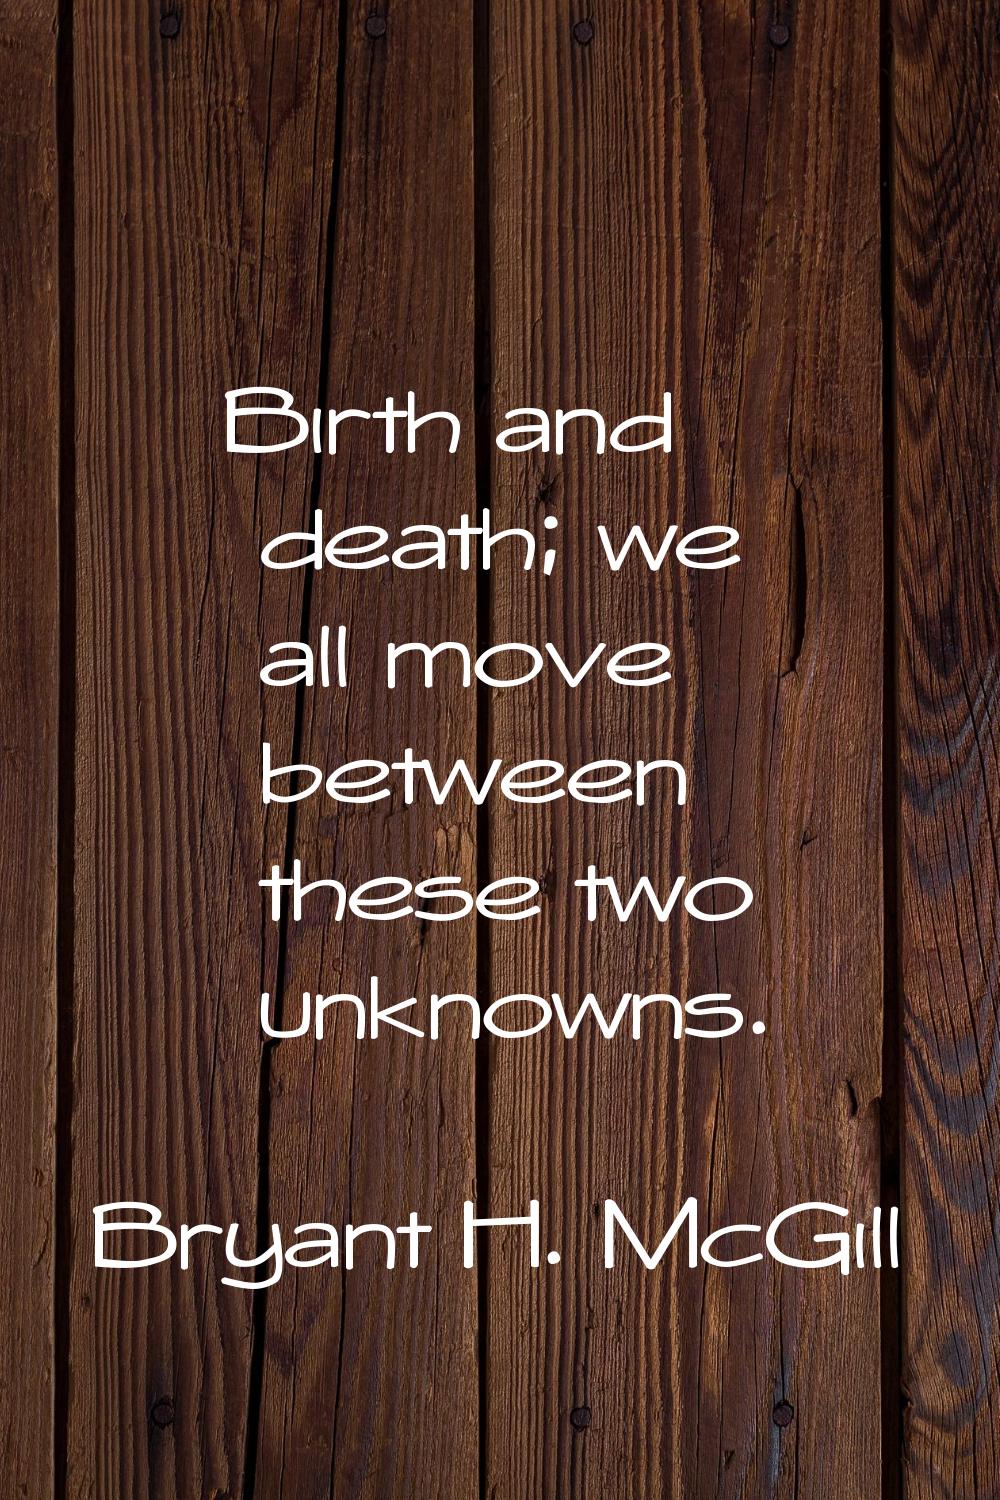 Birth and death; we all move between these two unknowns.